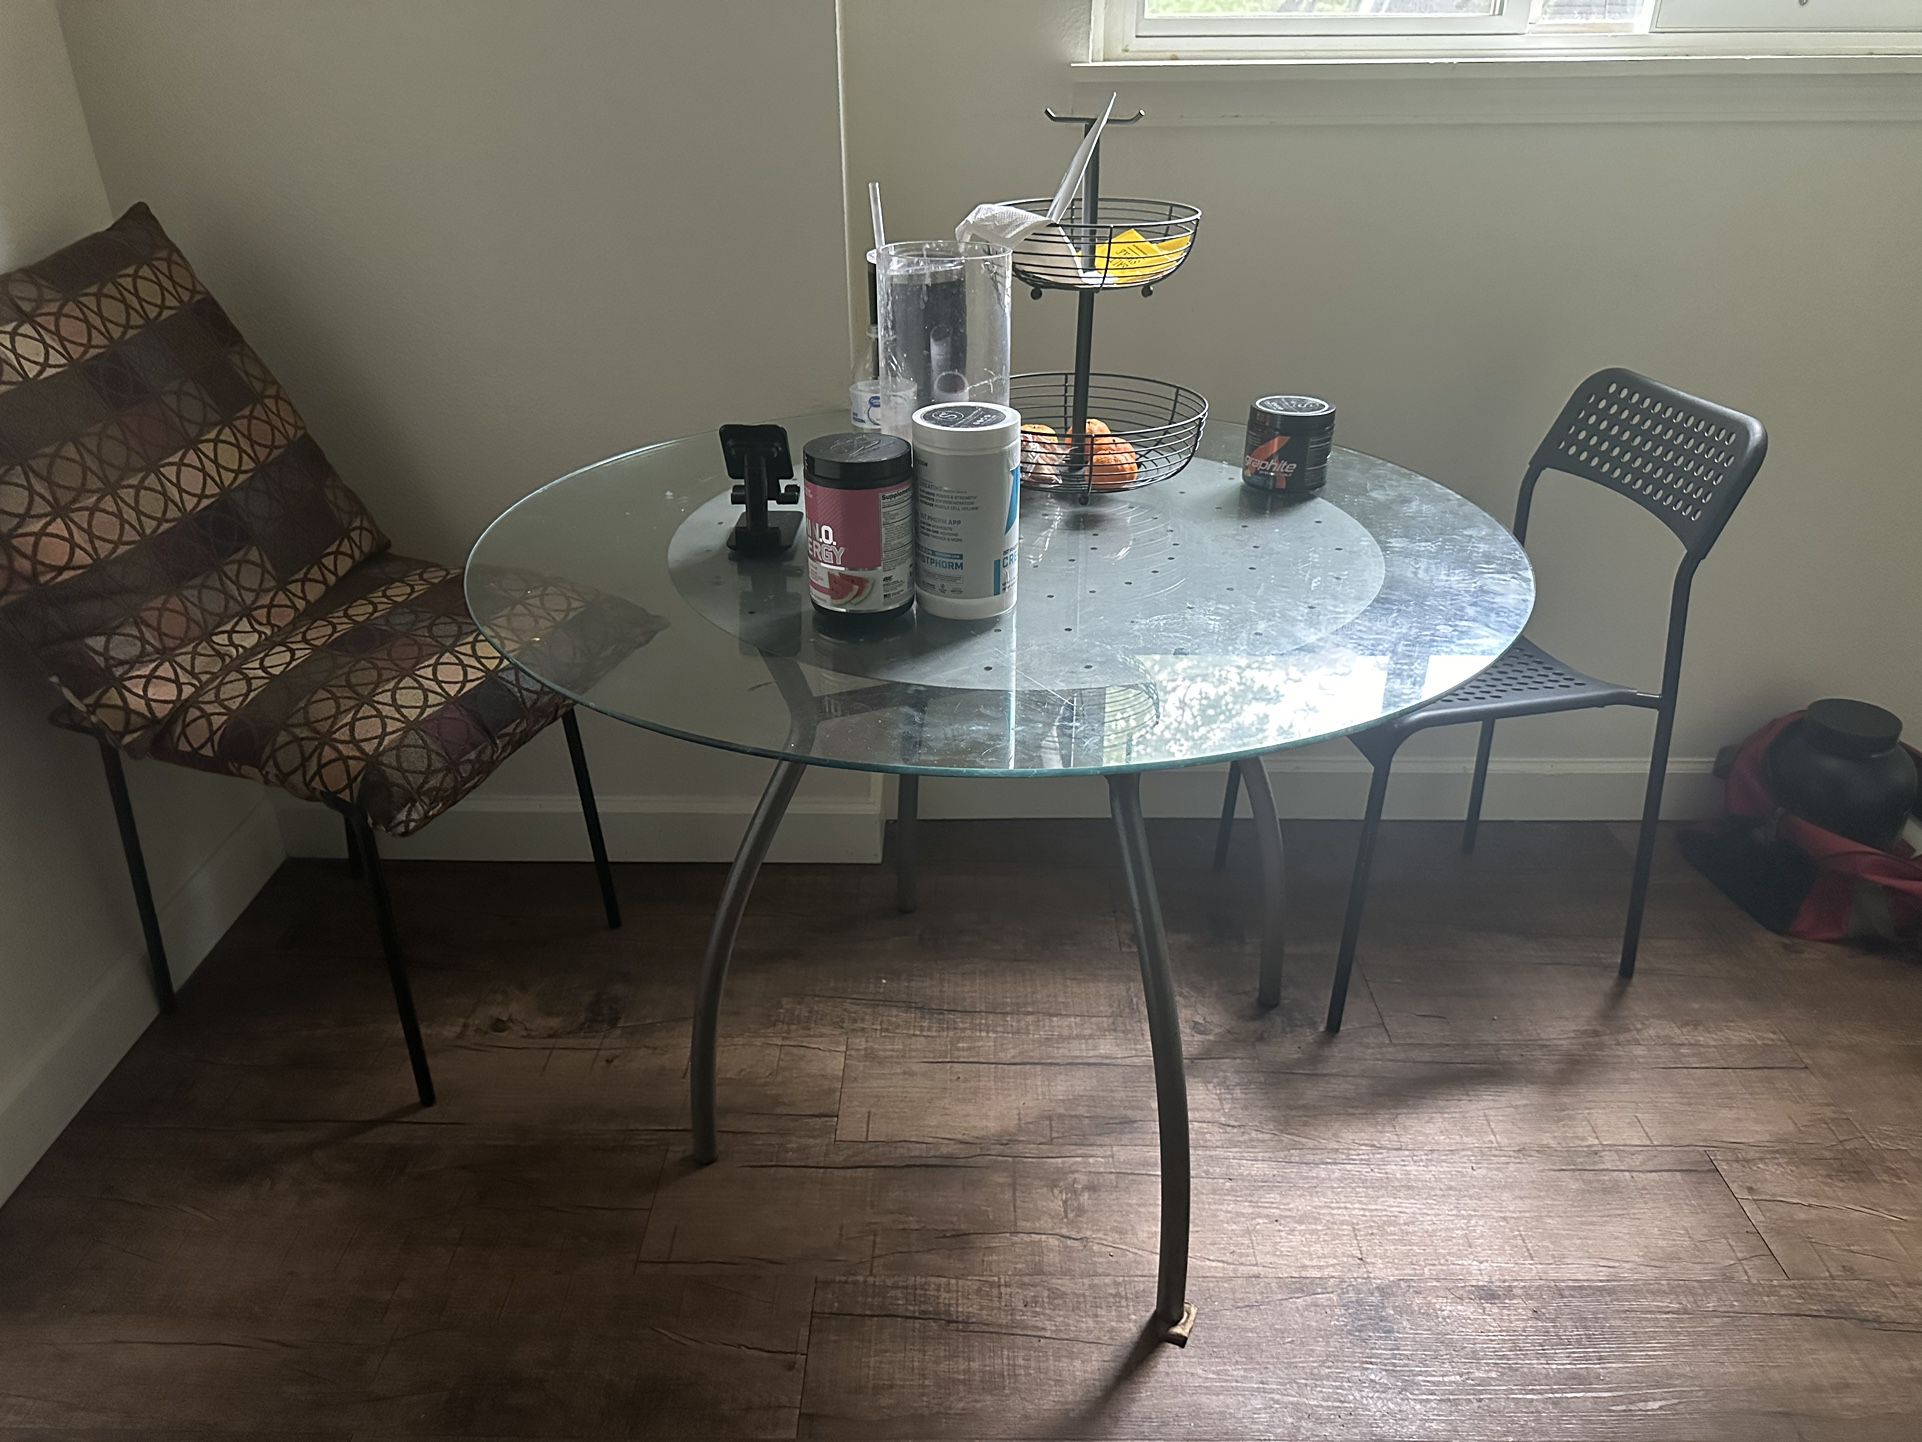 Breakfast table with two chairs included $80